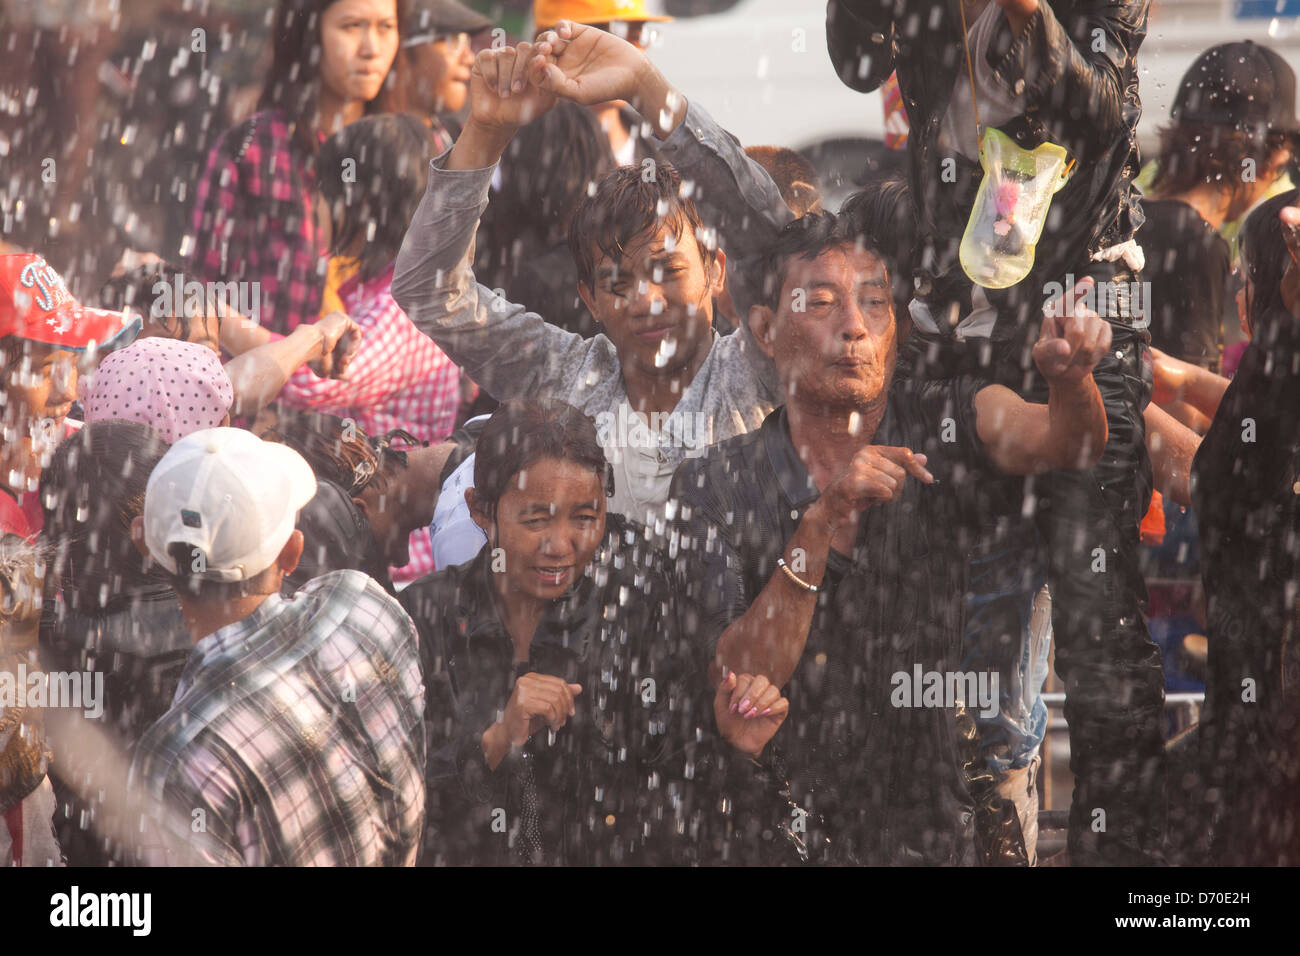 Young men dance in the street and get hosed with water during Mayanmar's Thingyan Water Festival. Stock Photo